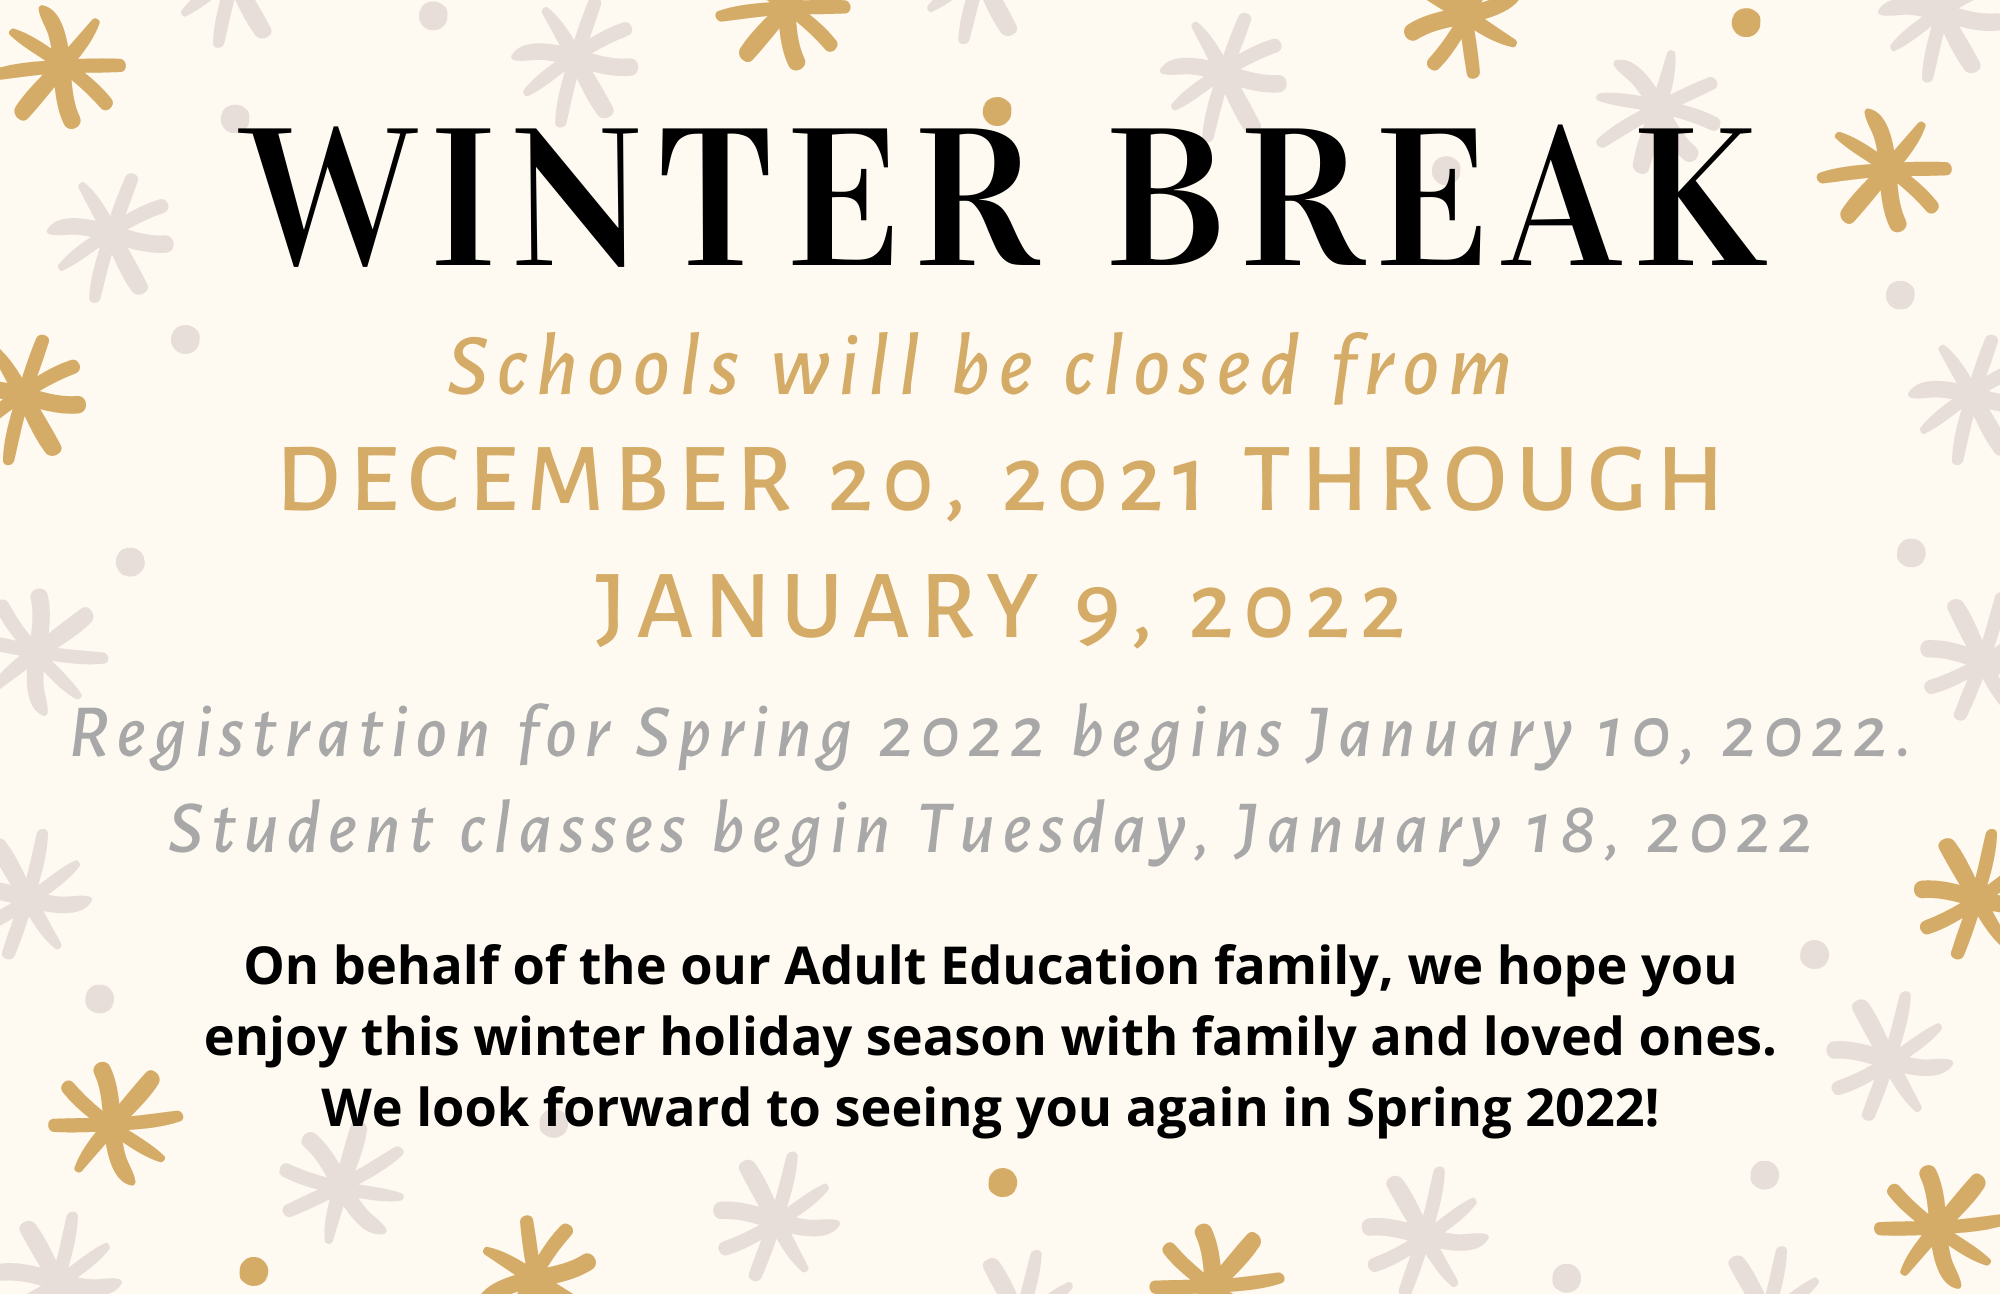 Winter Break information for new and continuing students.